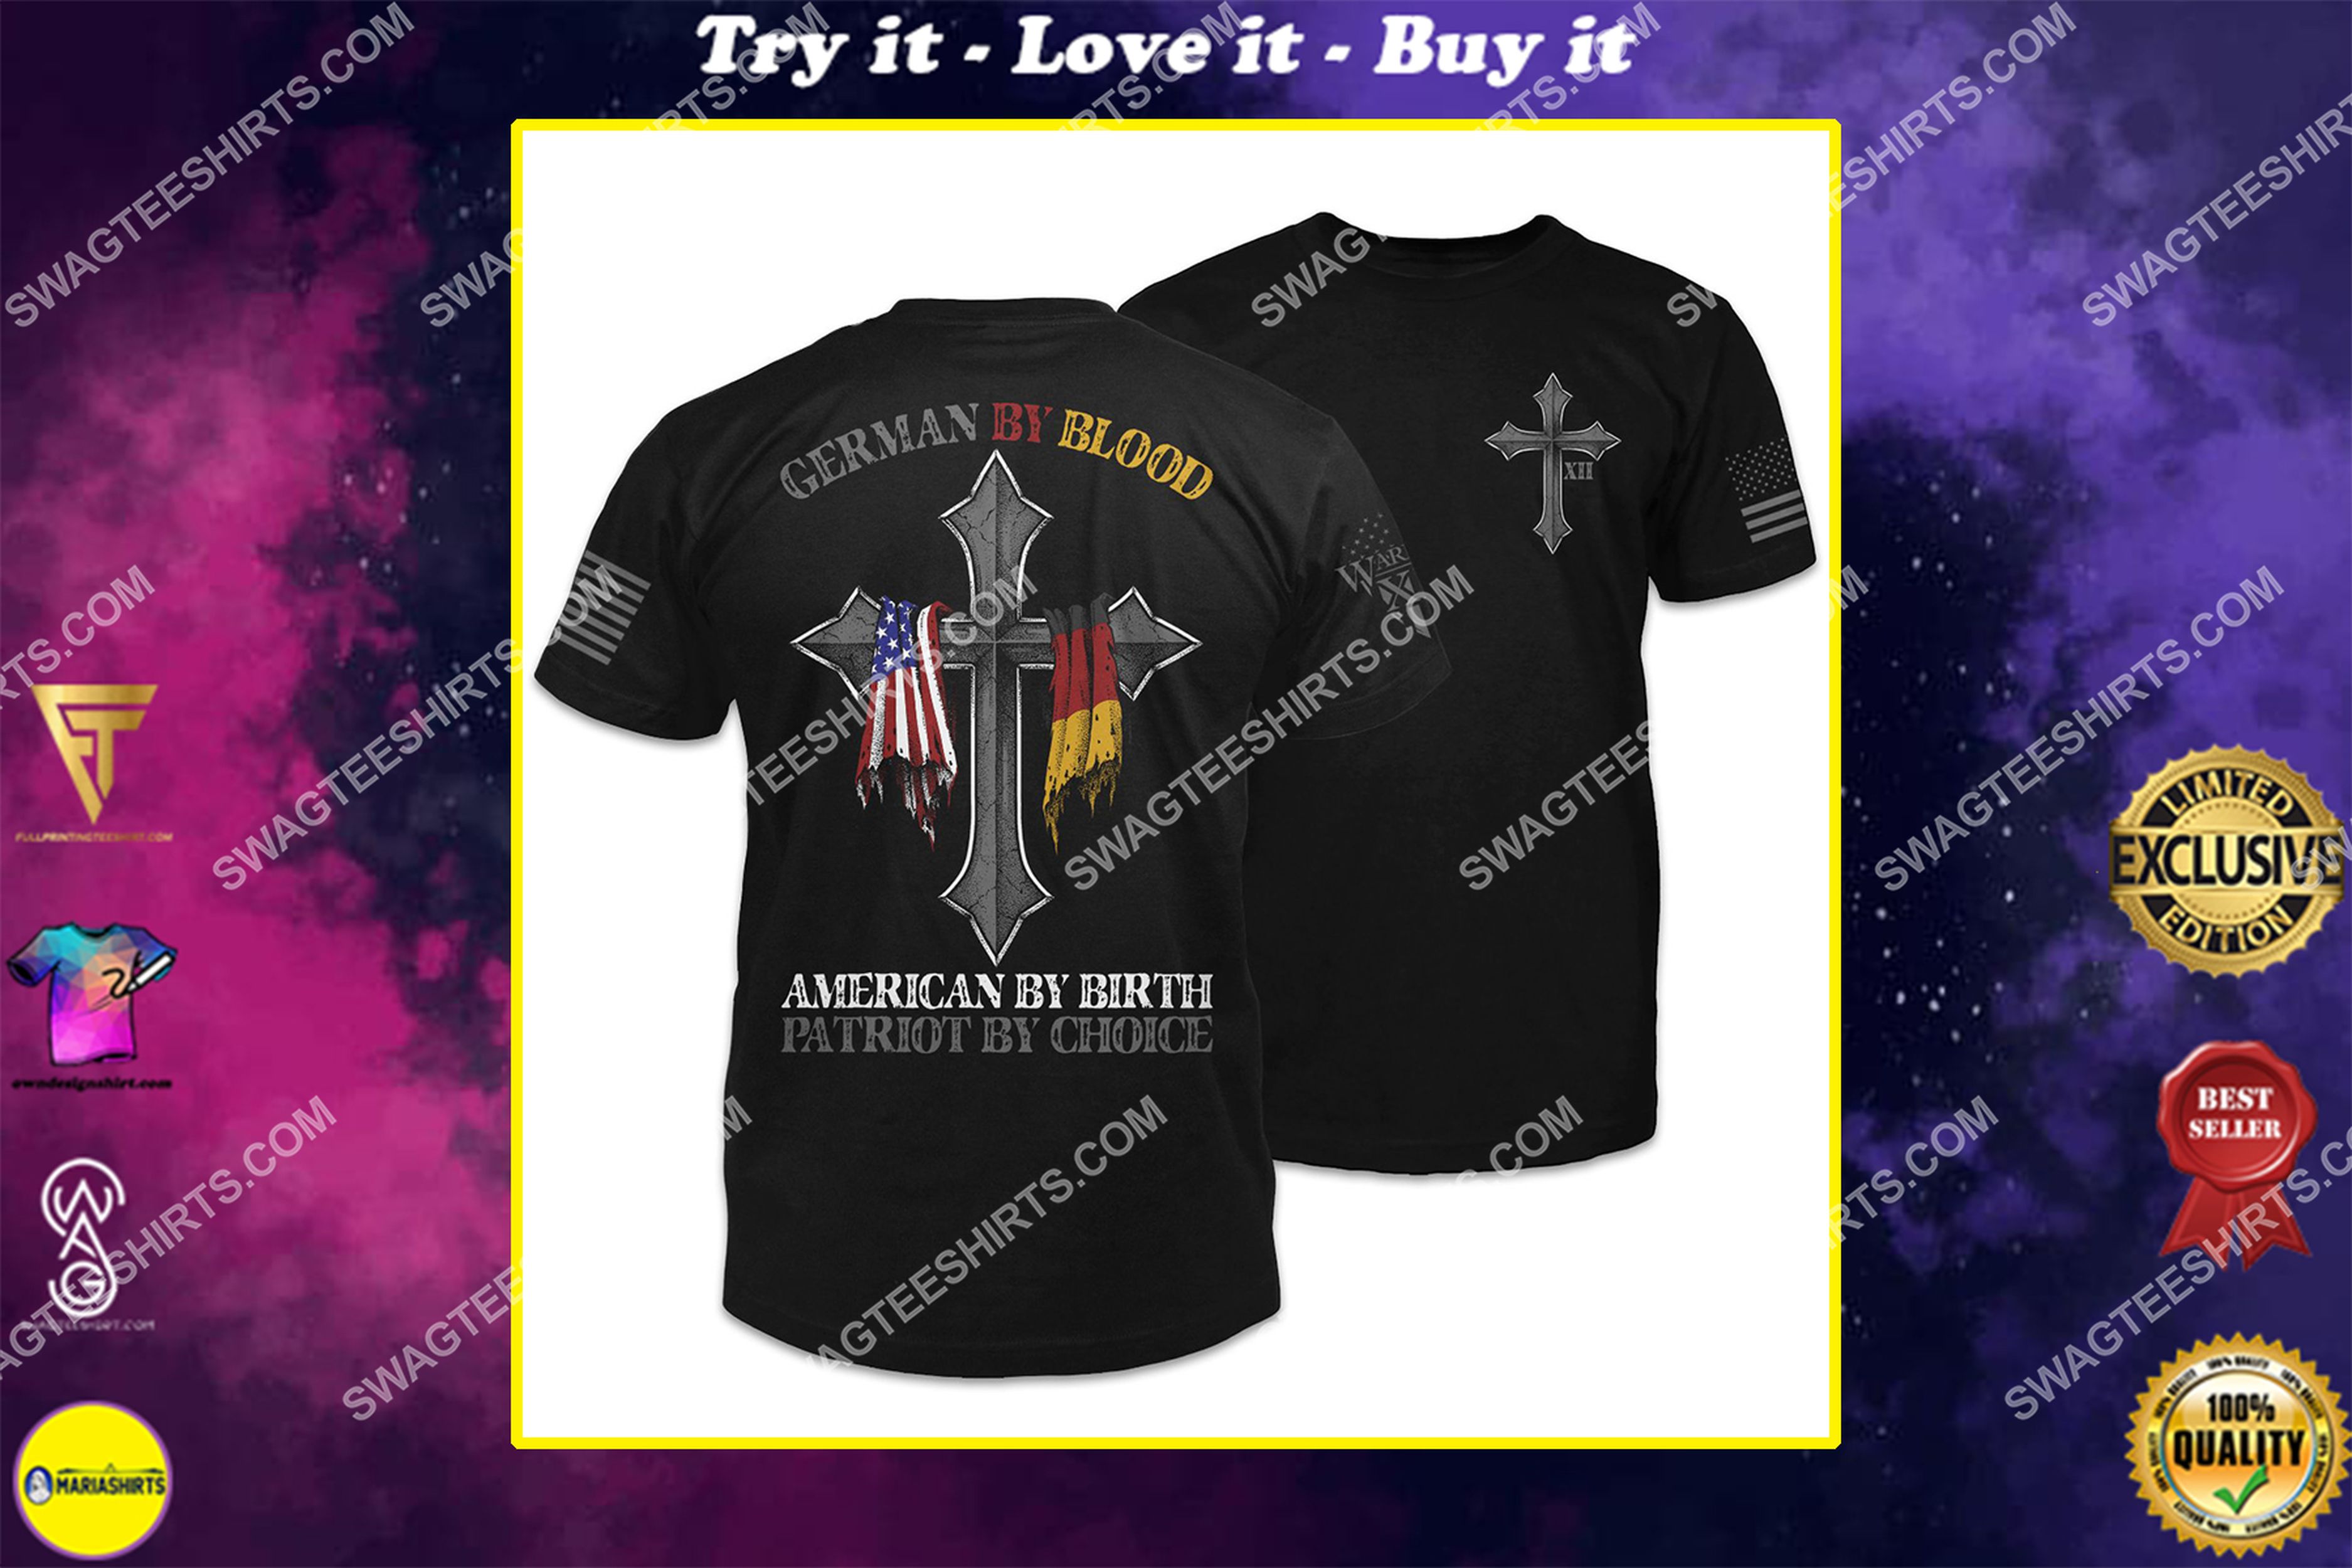 [special edition] german by blood american by birth patriot by choice shirt – maria